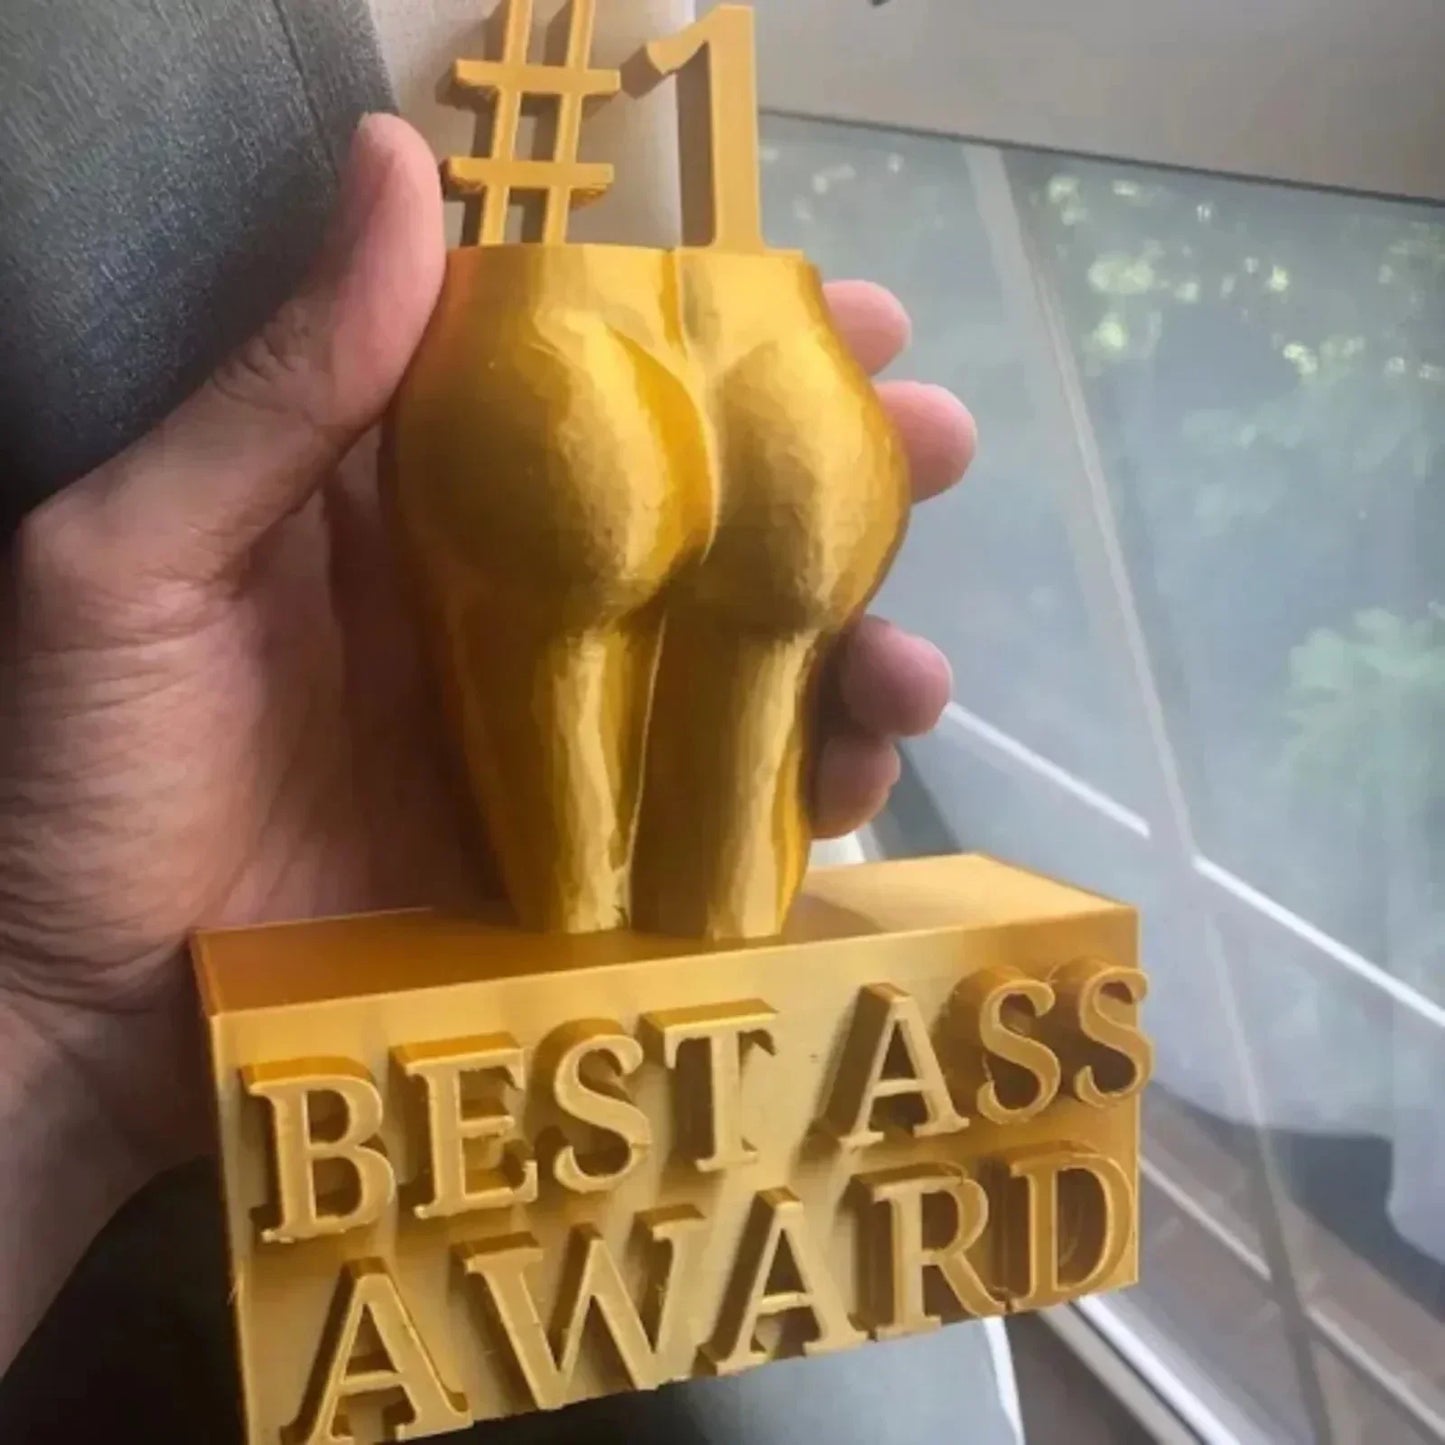 Best Ass Award Trophy Statue-Funny Creativity Resin Gold Ornament for Home Table Decorations Living Room Decor Win Cup Statuette